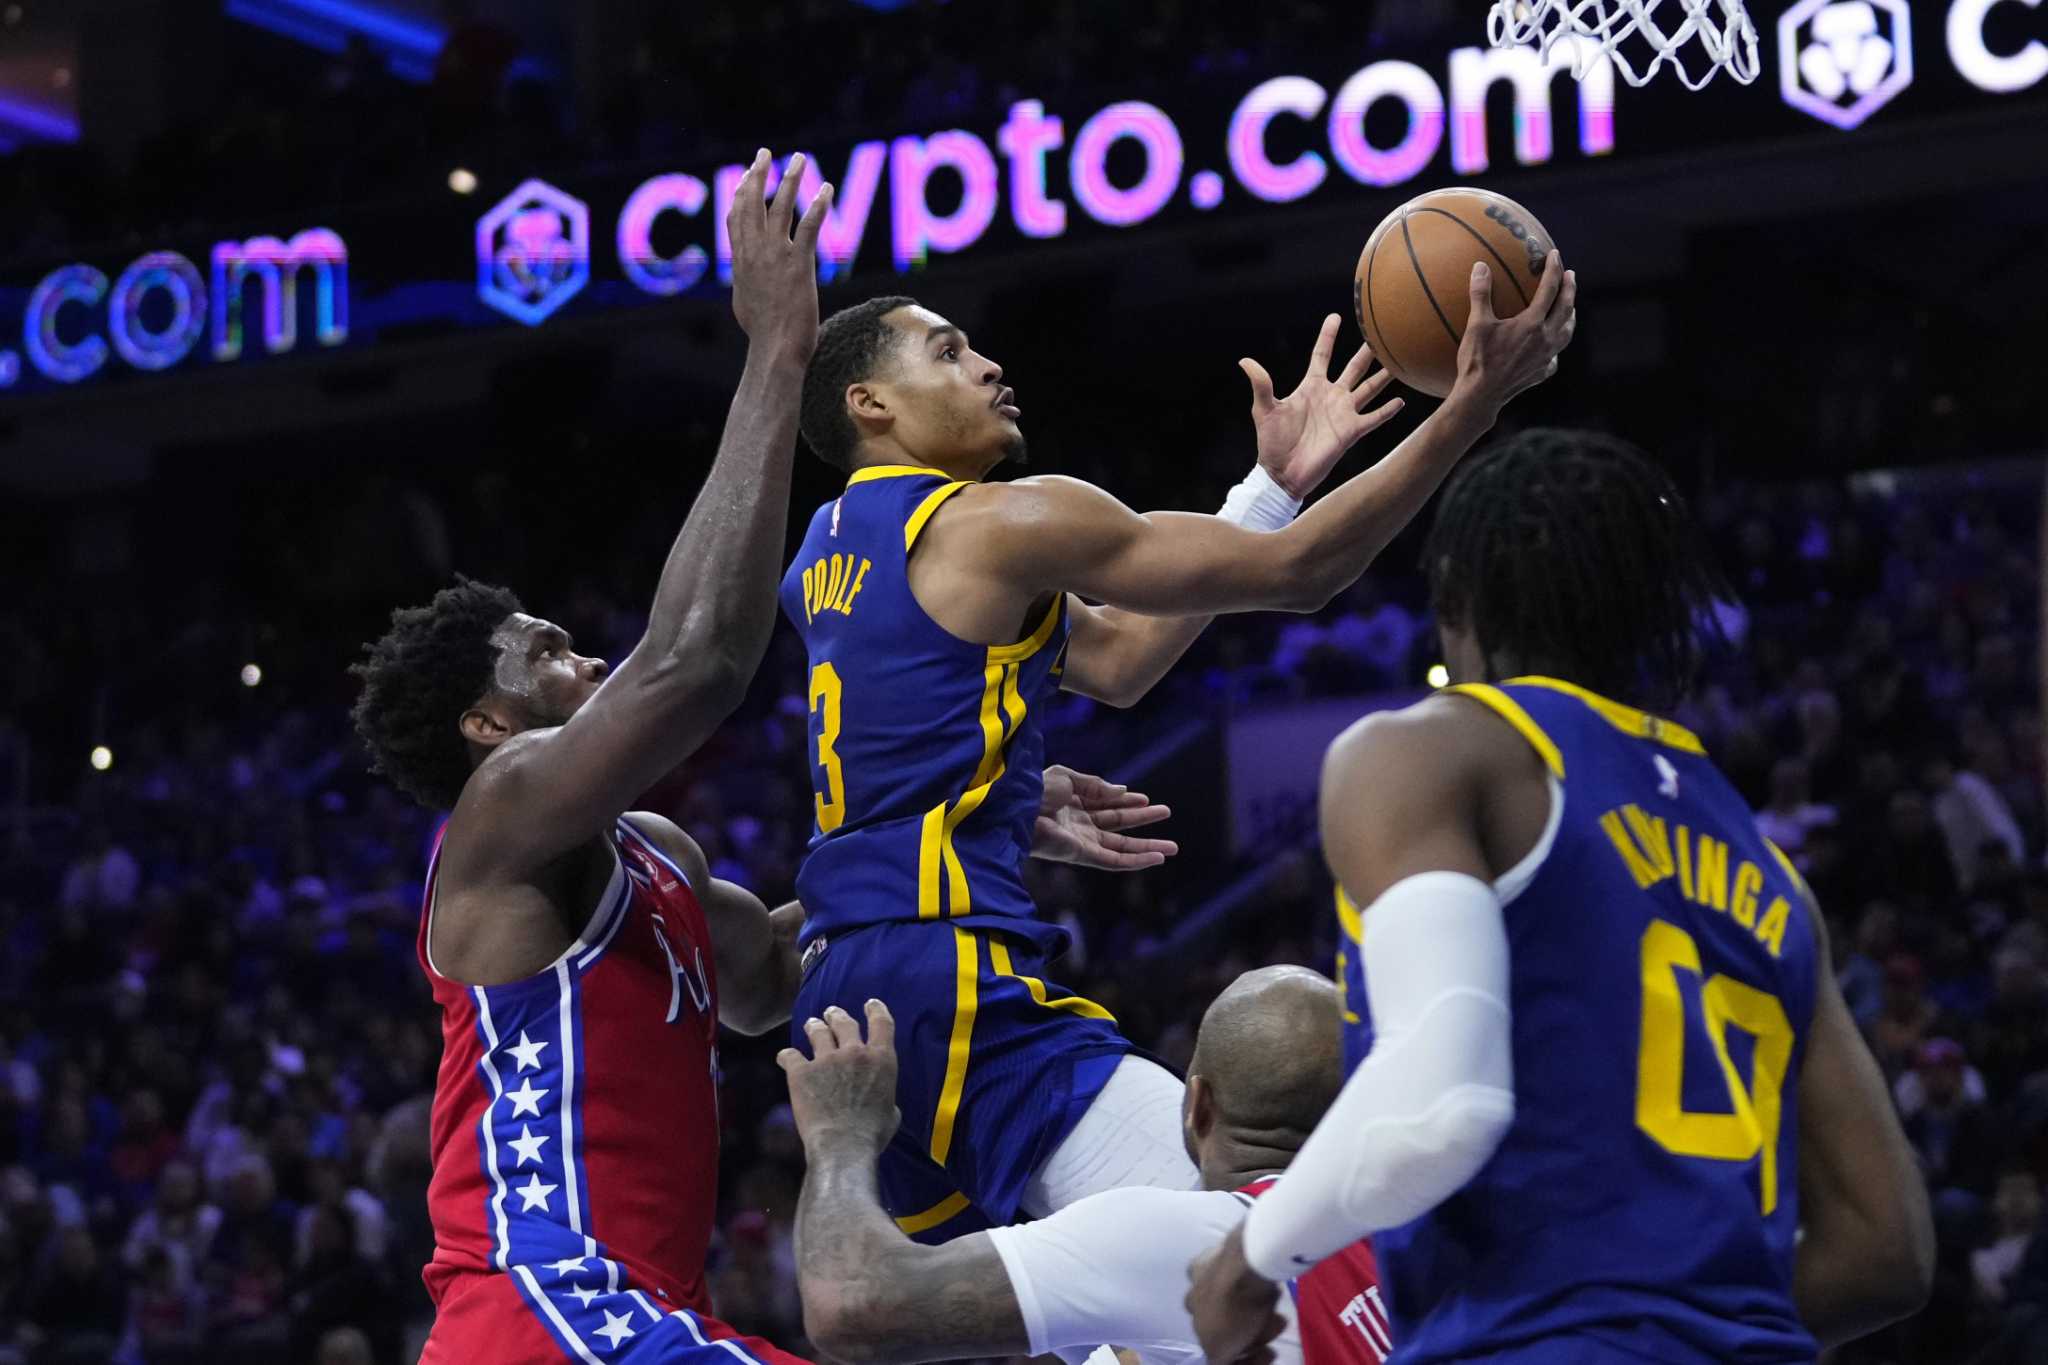 Golden State Warriors' Donte DiVincenzo stars vs. Sixers